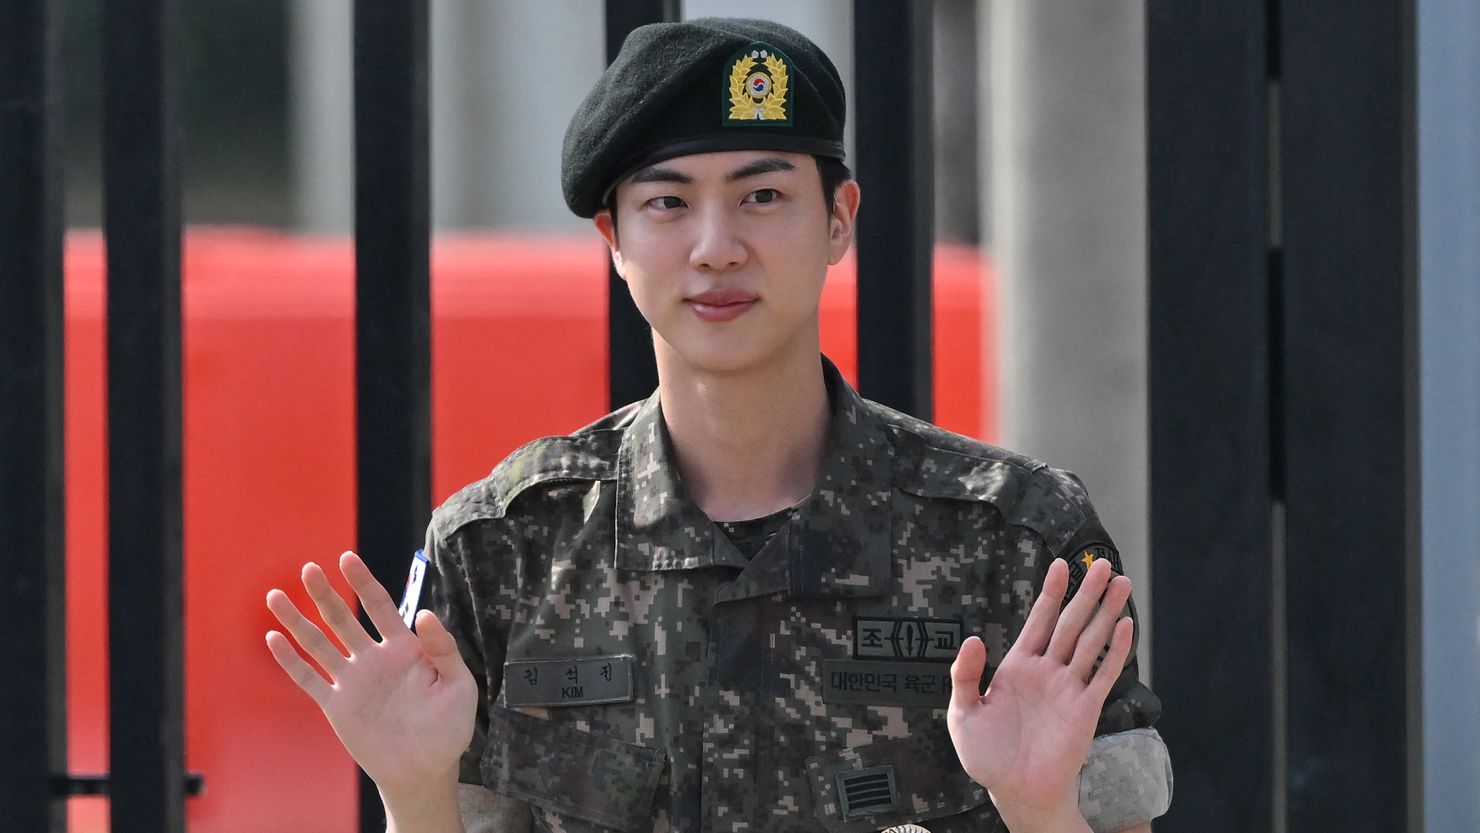 K-pop boy band BTS member Jin waves after being discharged from his mandatory military service outside a military base in Yeoncheon, South Korea on June 12, 2024.